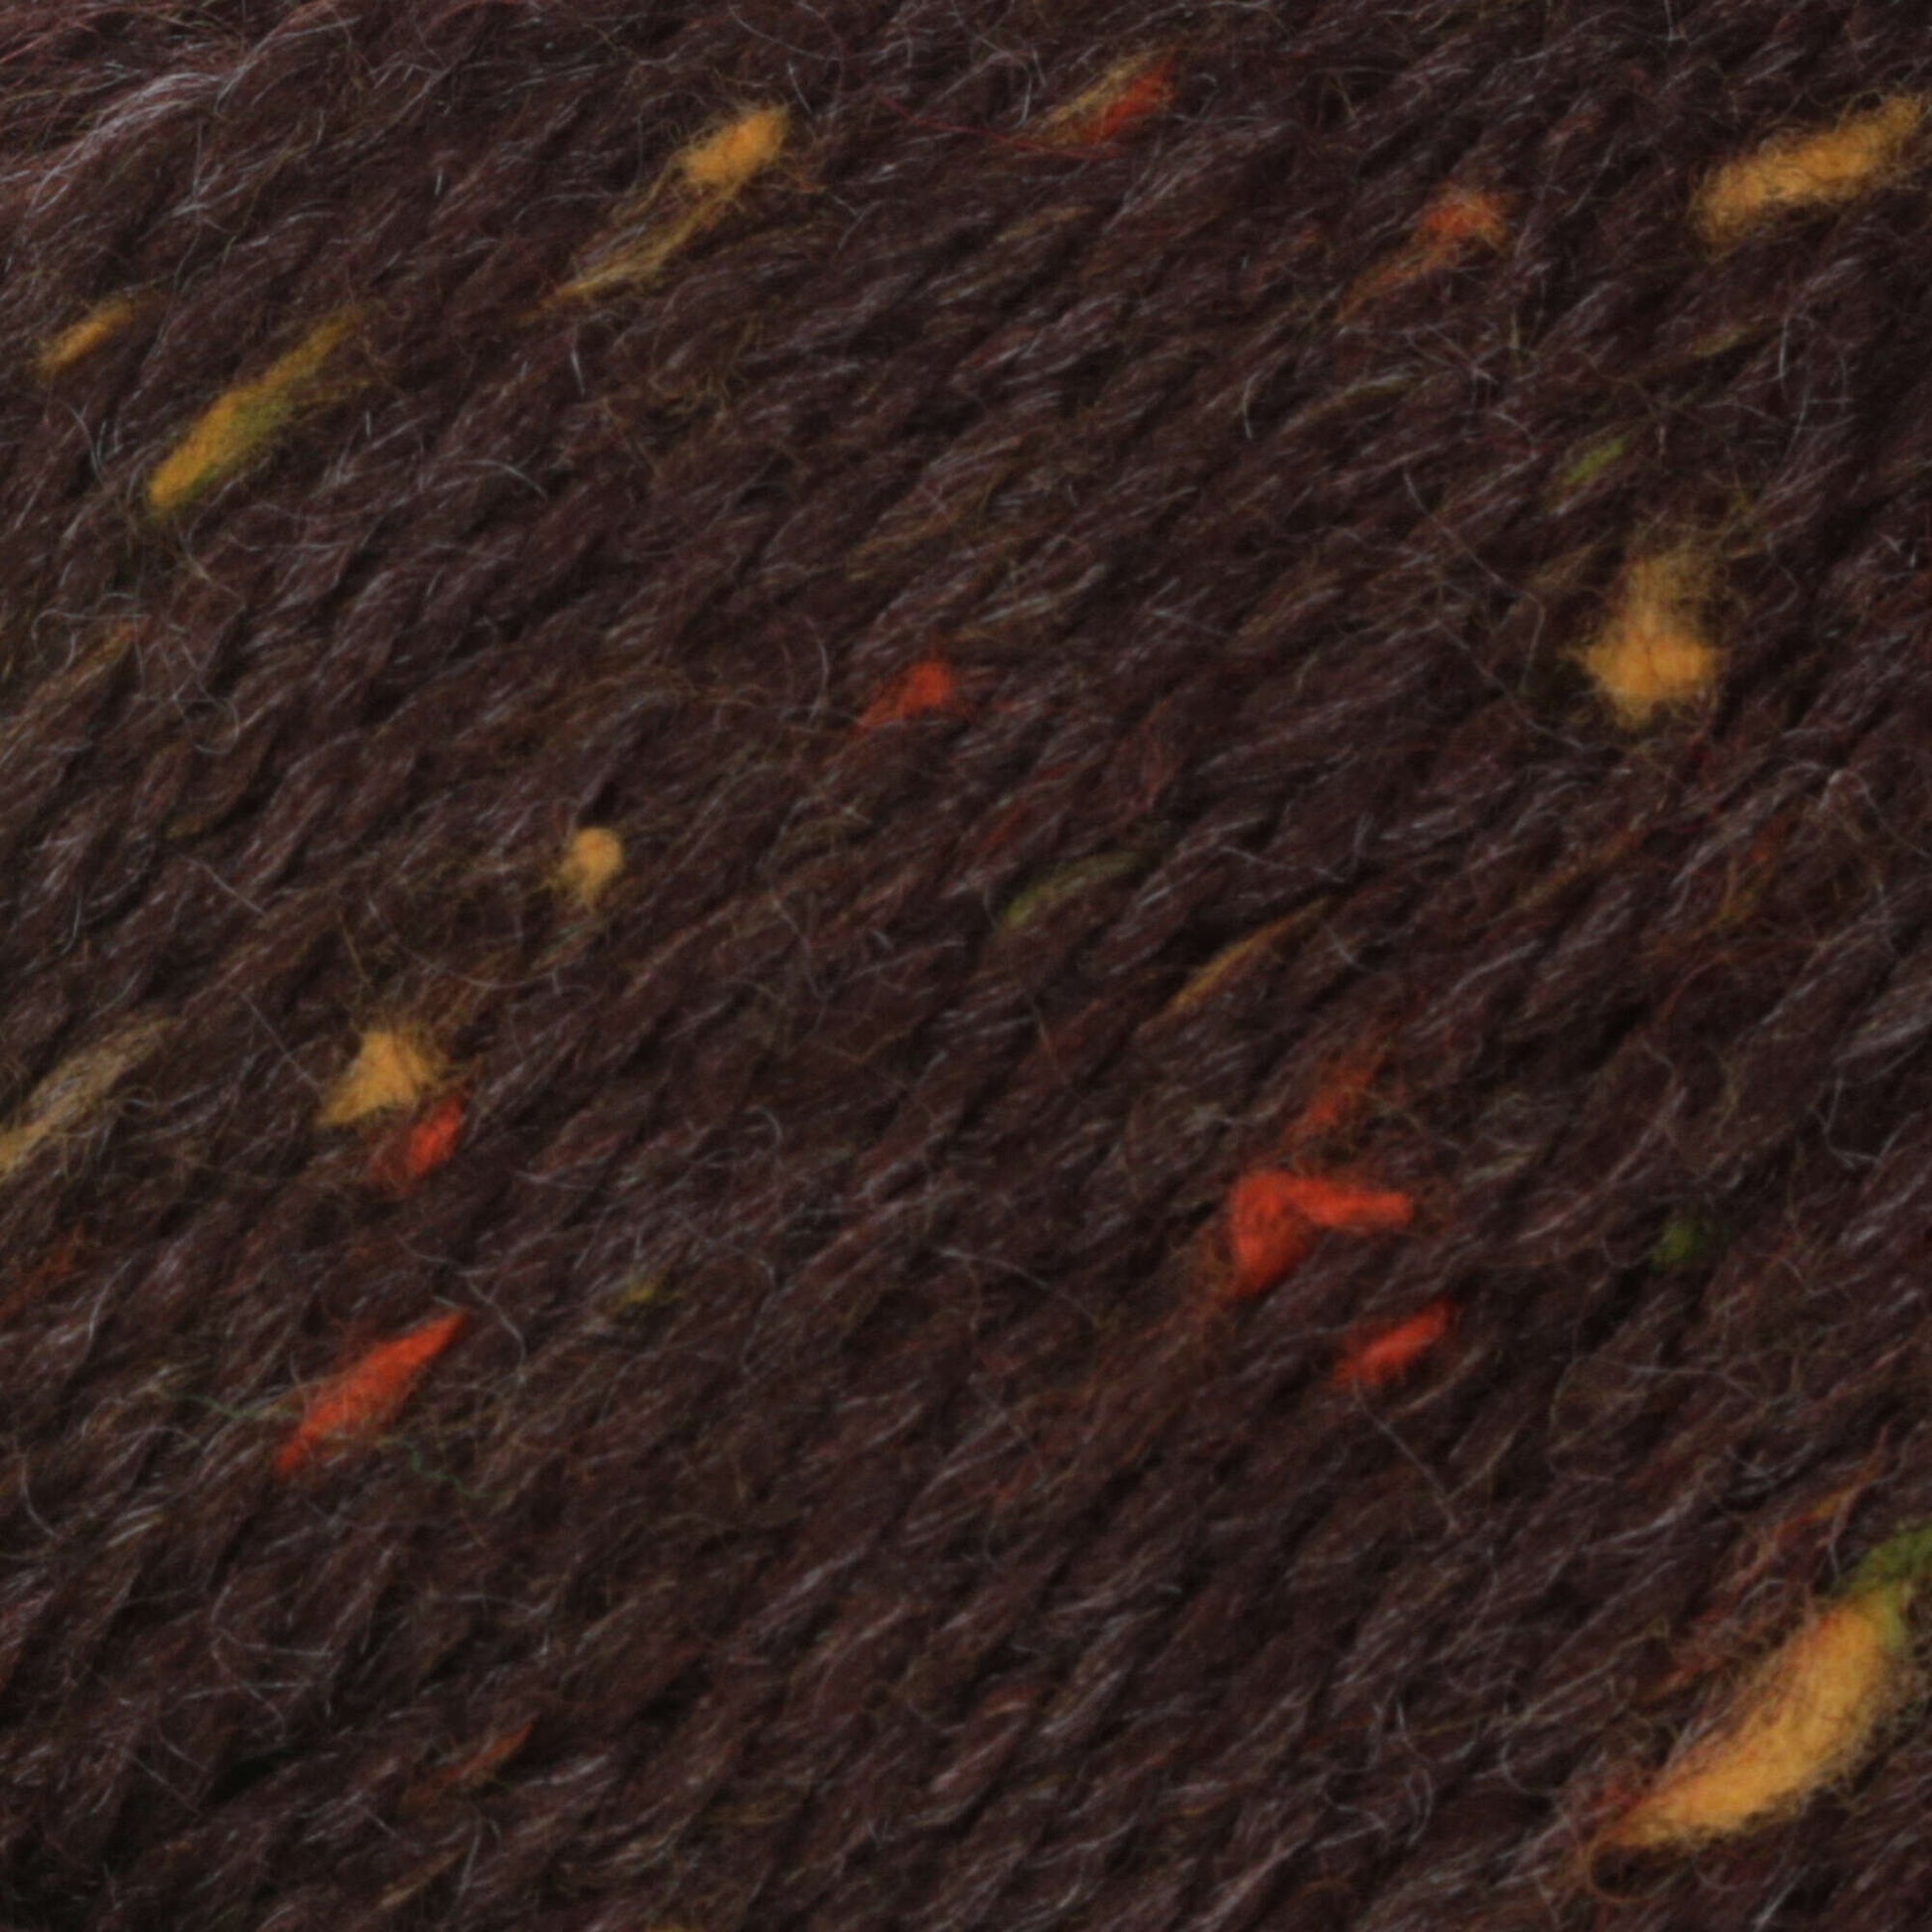 Patons Classic Wool Worsted Yarn - Discontinued shades